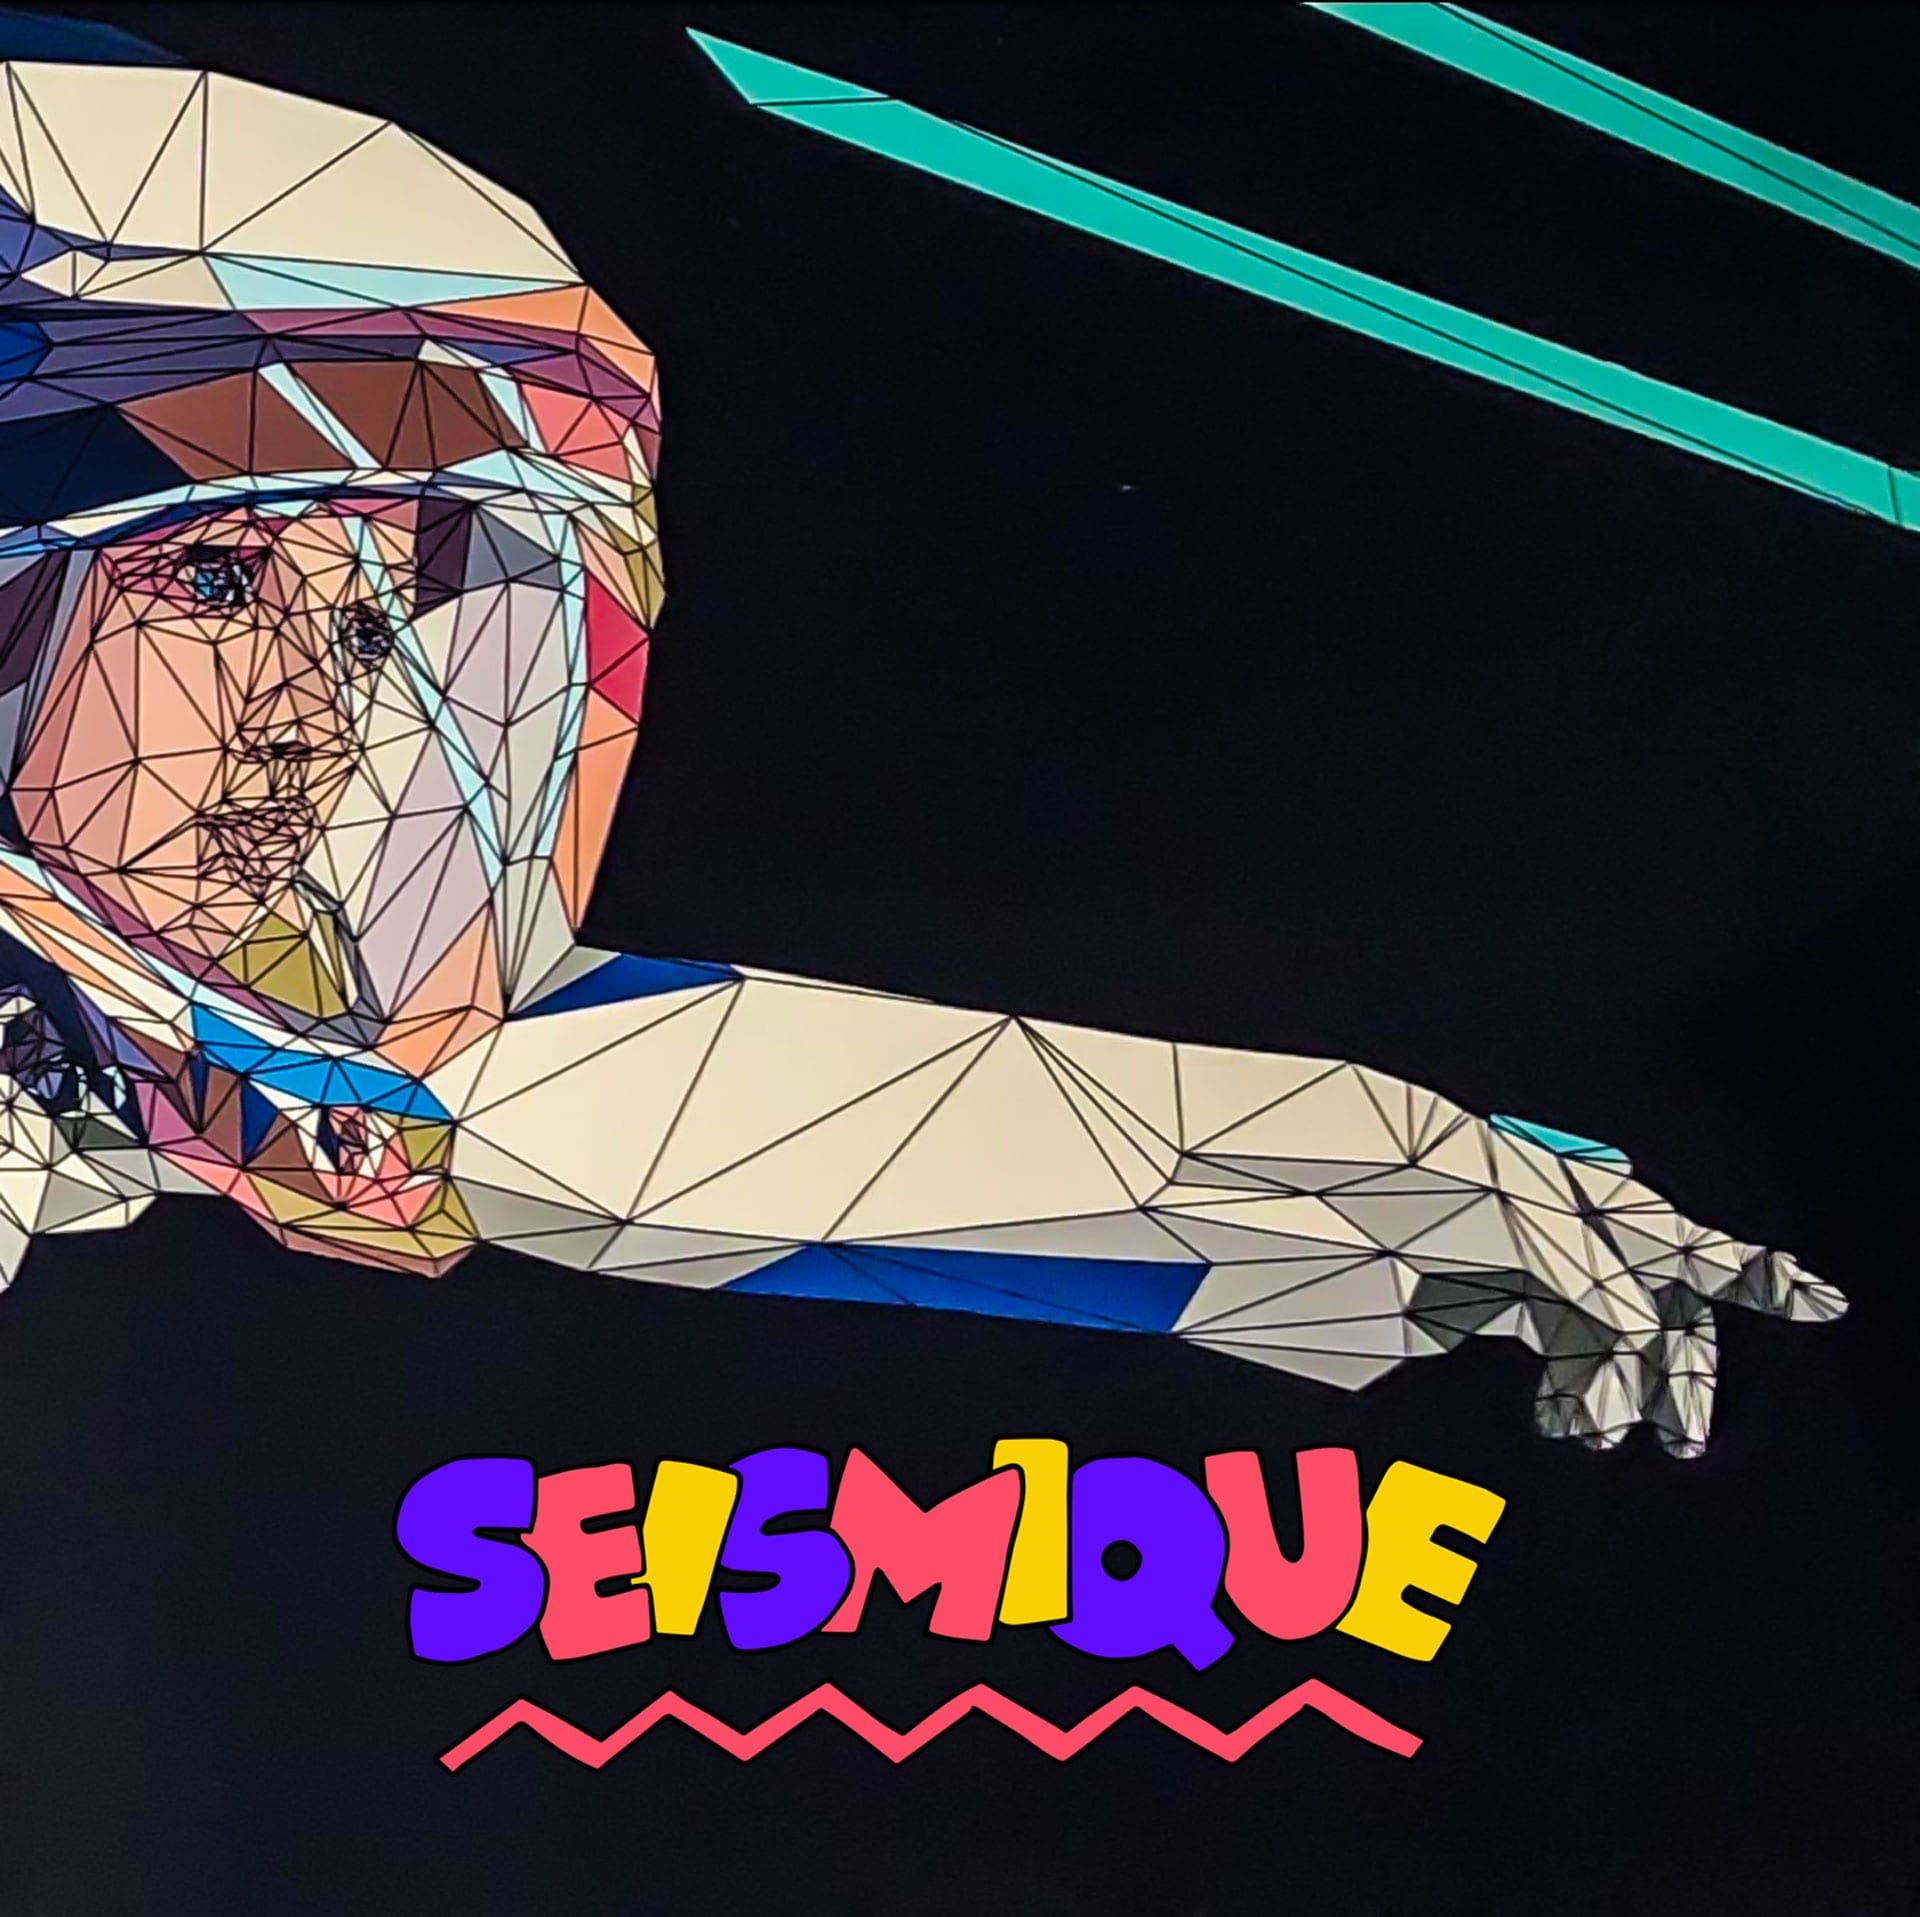 What is Seismique? Houston's Art Experience of Tomorrow!